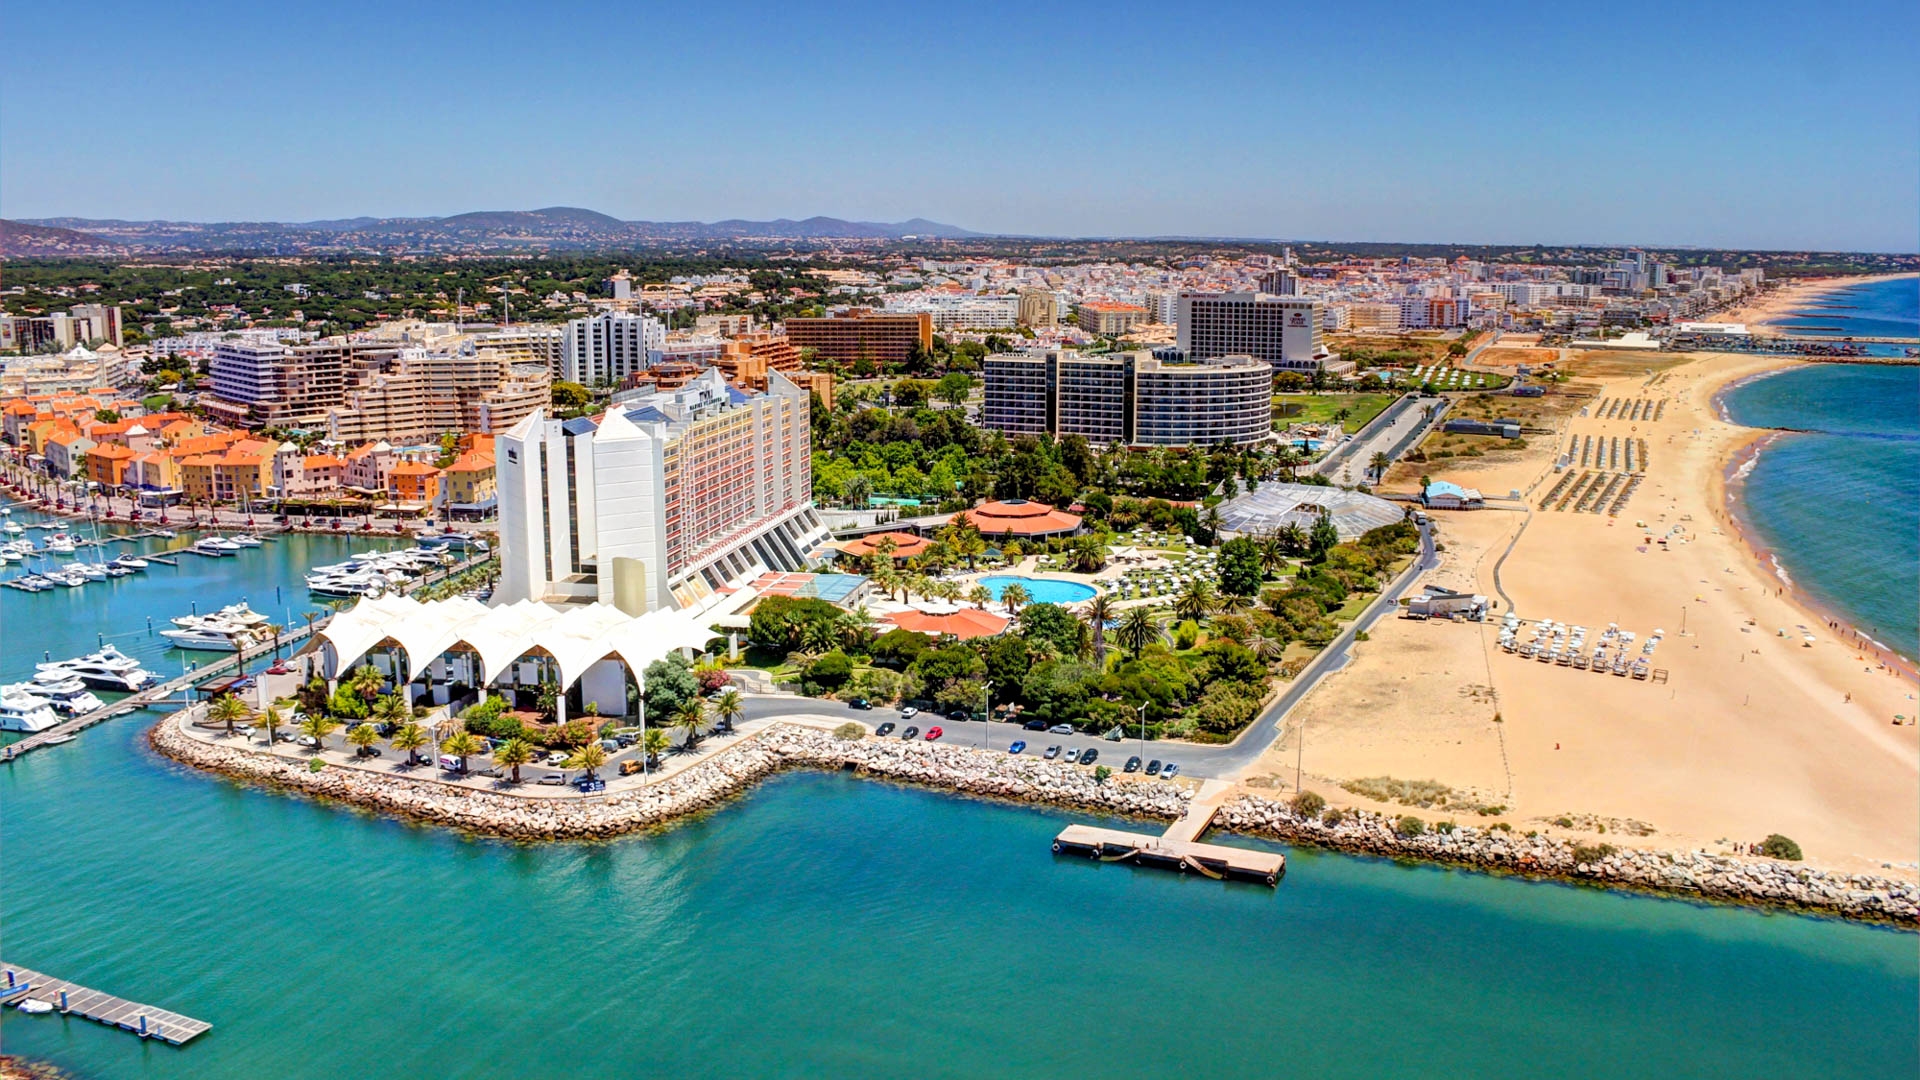 Vilamoura to grow: journey to the past, present and future